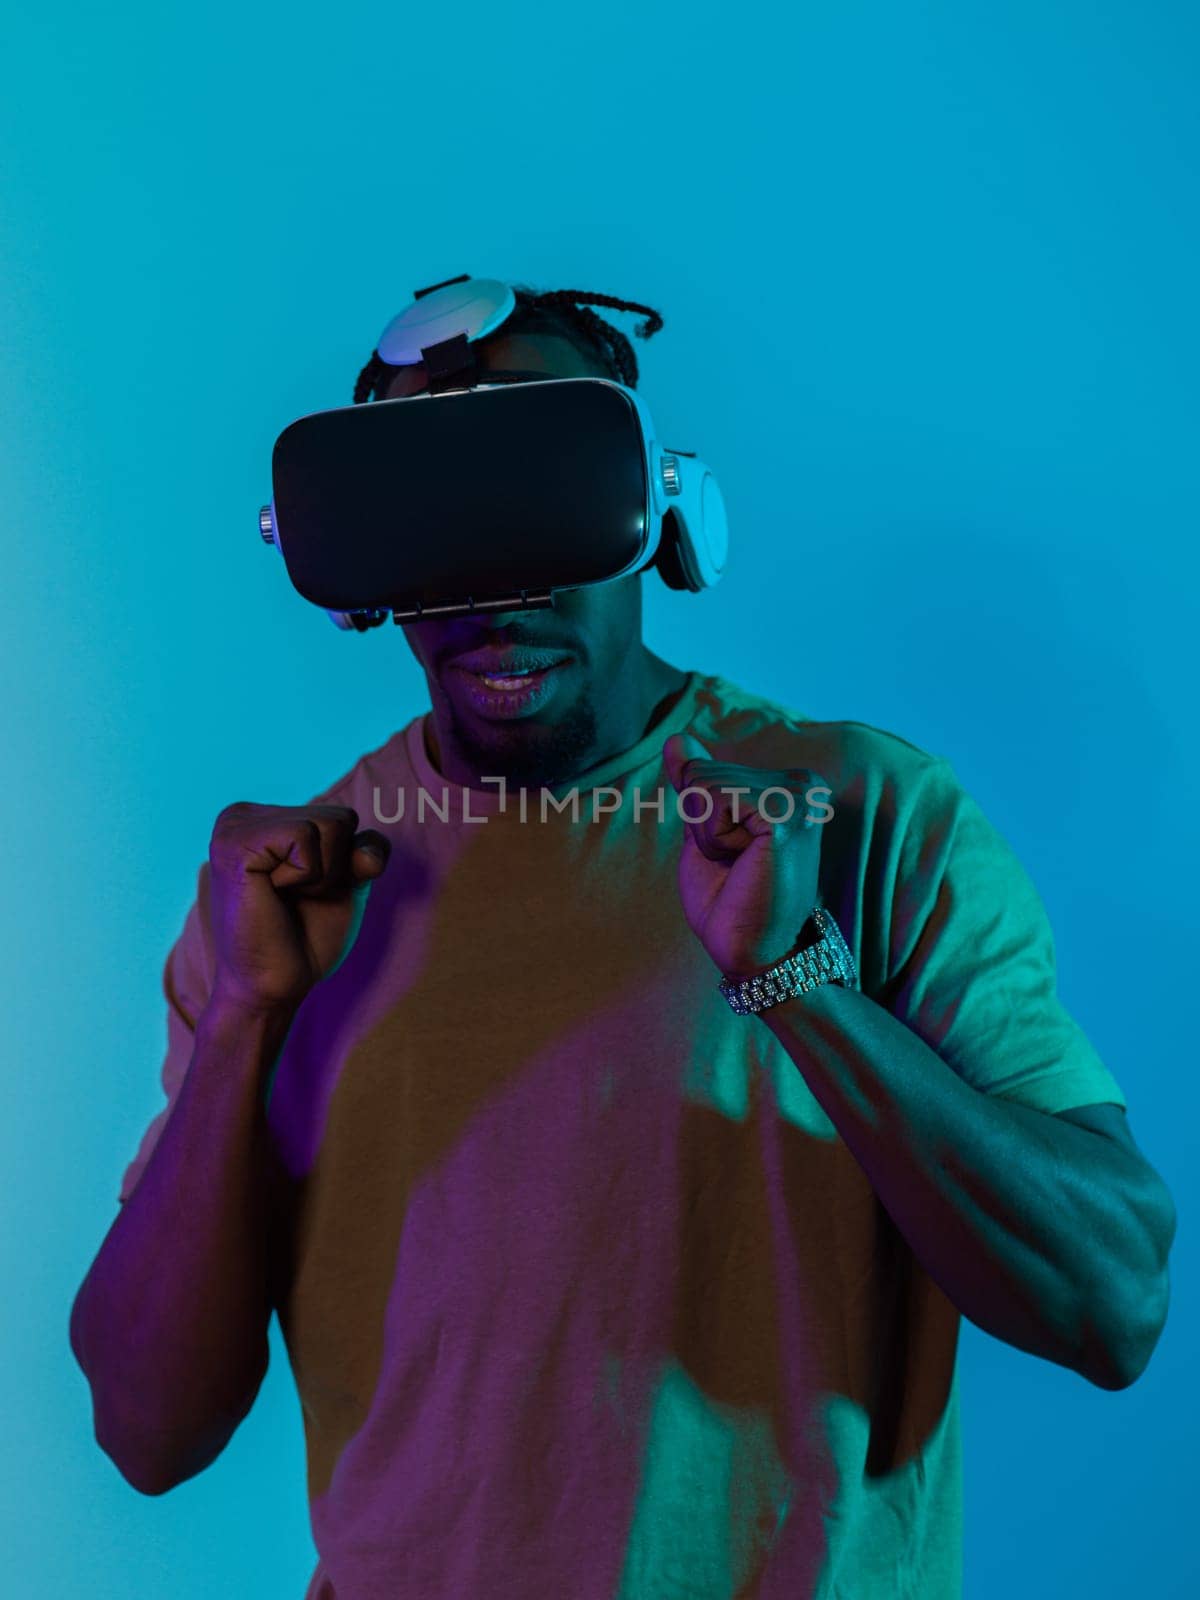 African American man immerses himself in a thrilling horror gaming experience using VR glasses, creating an isolated and intense atmosphere against a striking blue background by dotshock